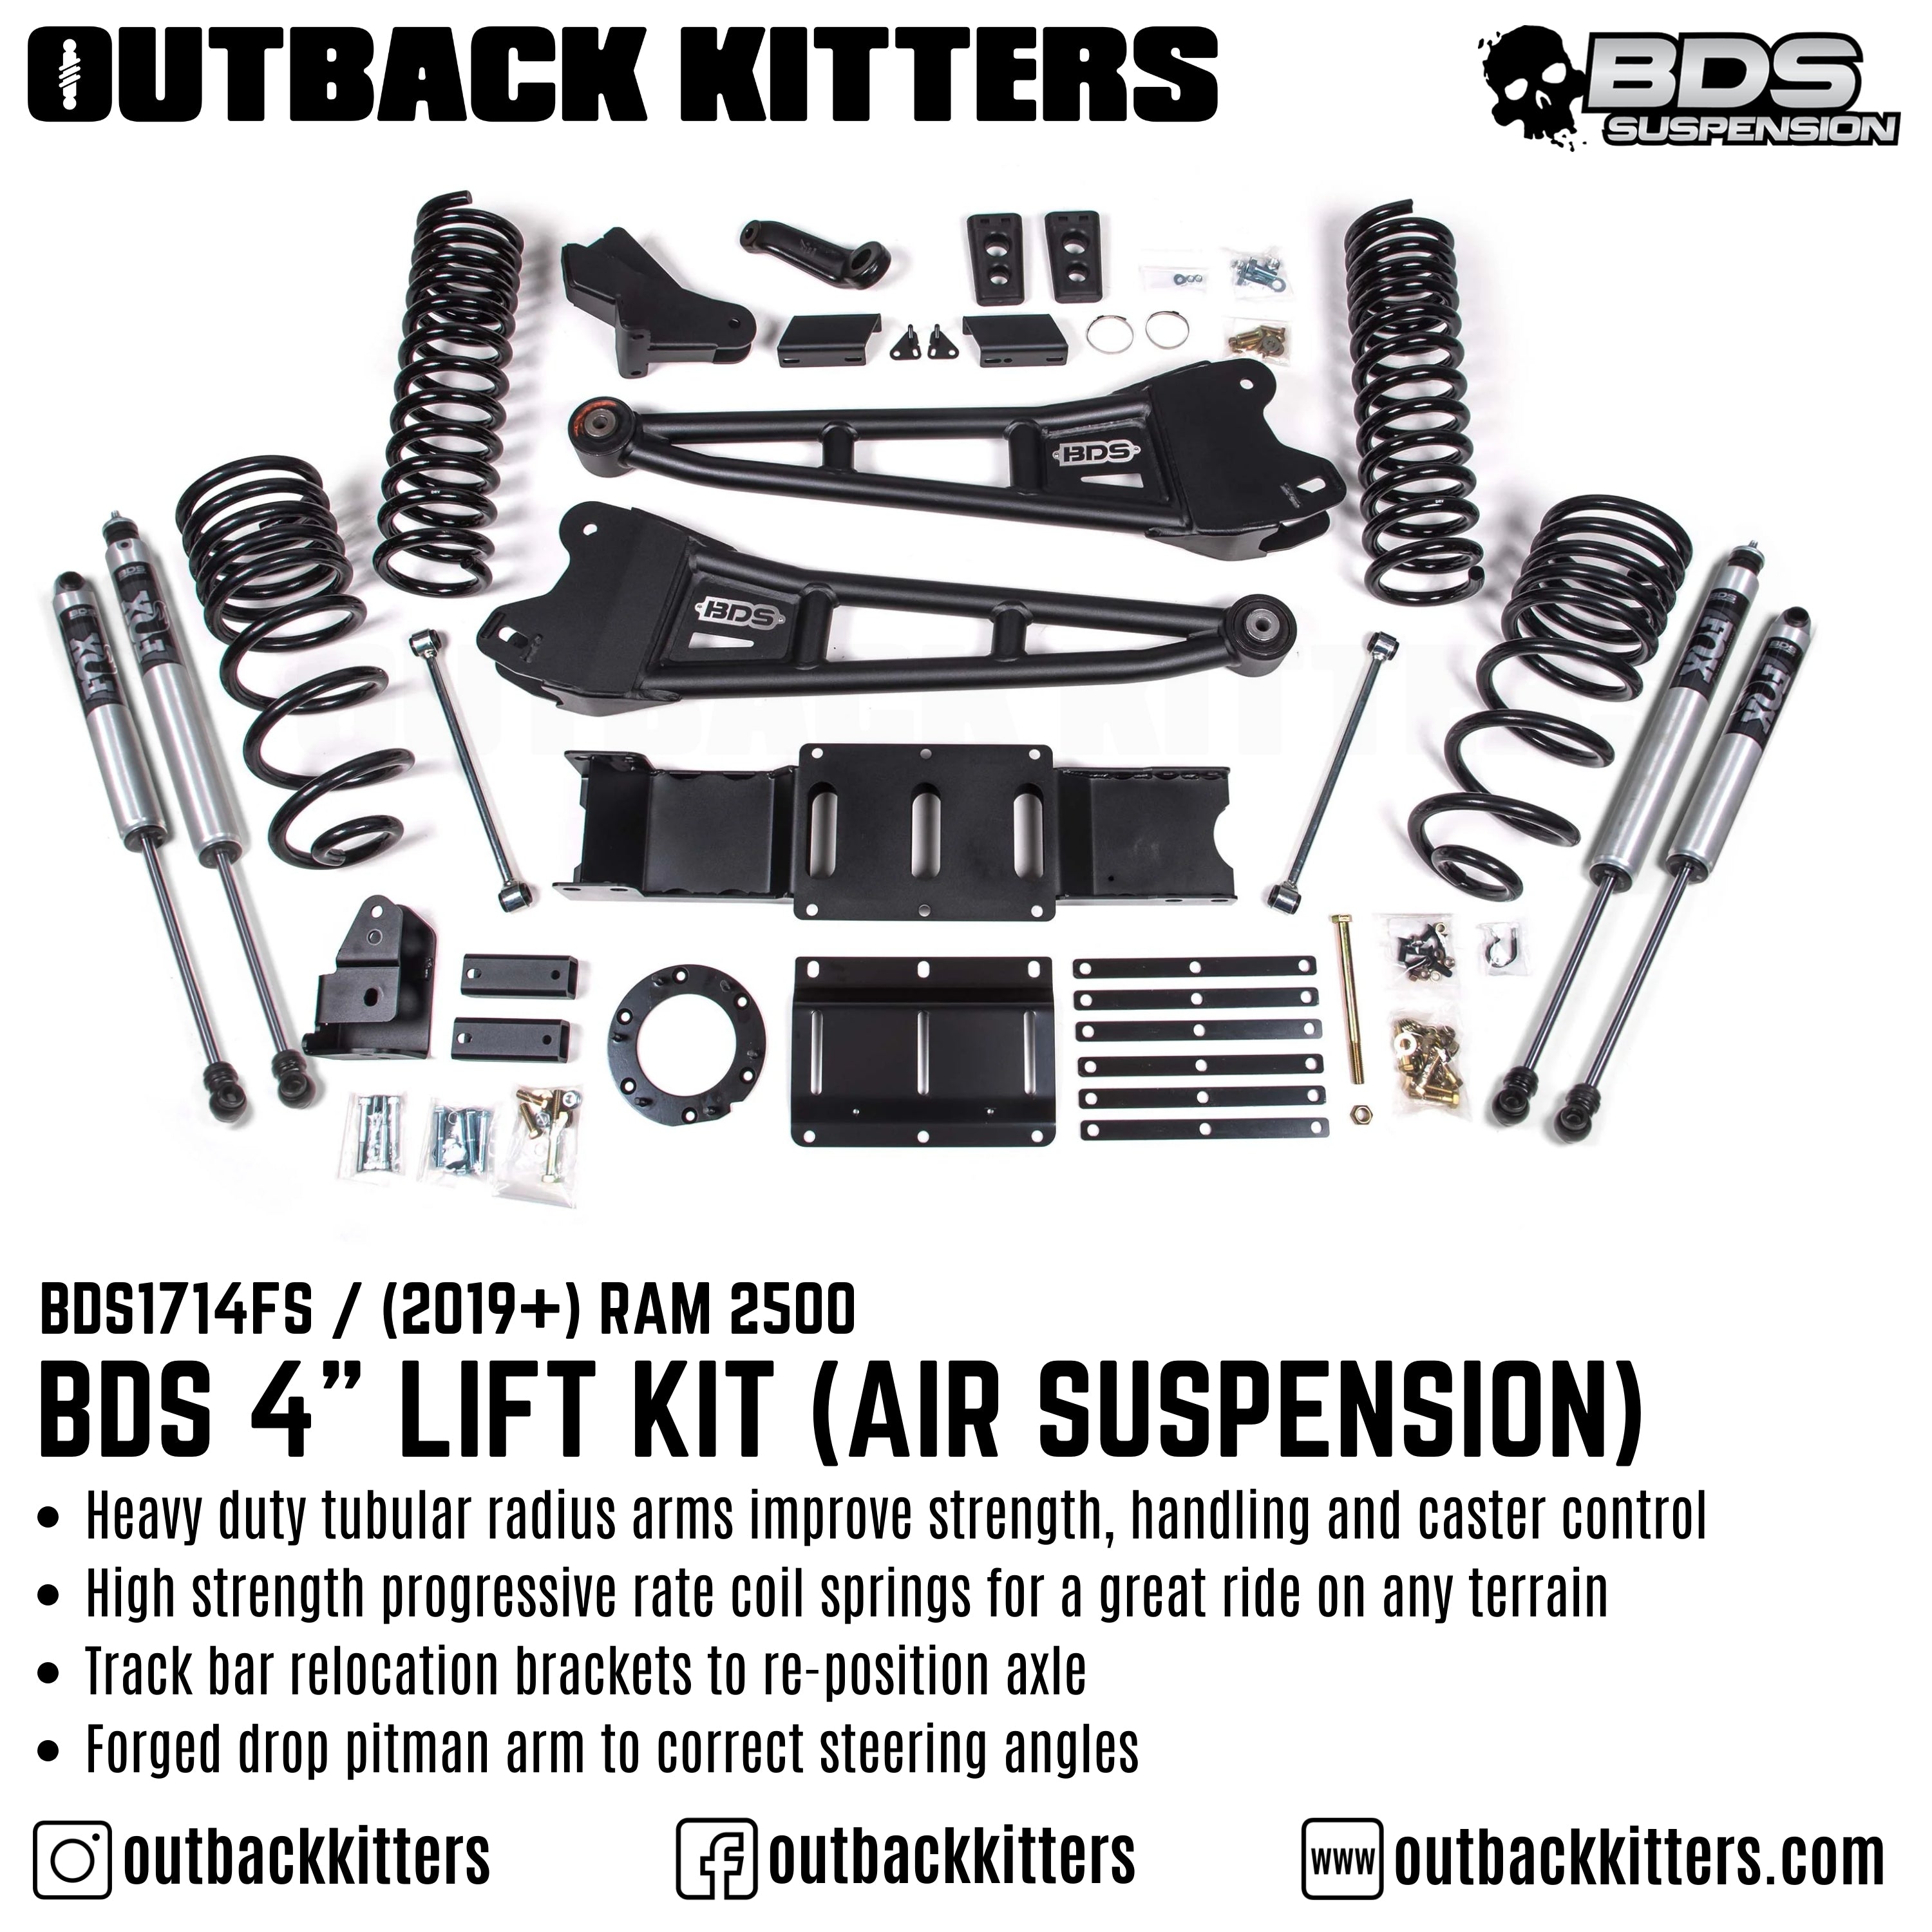 BDS Suspension 4" Lift Kit for 2019+ Ram 2500 with Fox Shocks - Outback Kitters